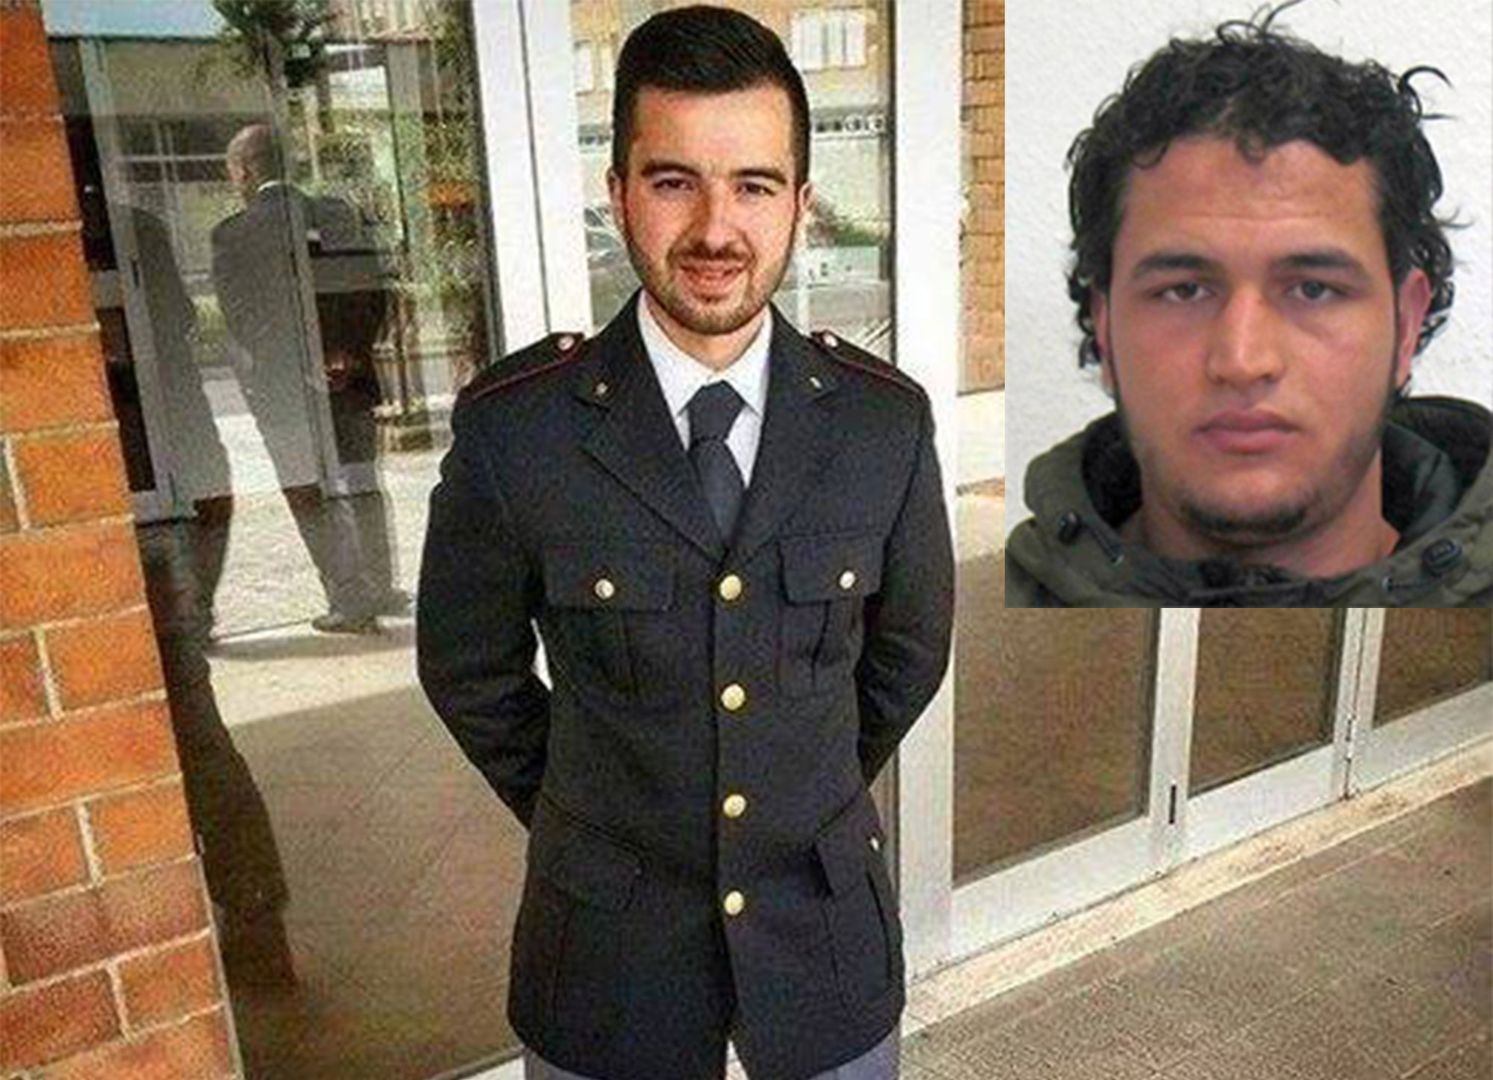 epa05684720 An undated handout composite photo made available by German Federal Criminal Police Office (BKA) on 21 December 2016 shows suspect Anis Amri who is searched for in connection to the 19 December Berlin attacks. A manhunt for the truck driver is underway after an initial suspect had to be released after he was cleared of the suspicion. At least 12 people were killed and dozens injured when a truck on 19 December drove into the Christmas market at Breitscheidplatz in Berlin, in what authorities believe was a deliberate attack.  EPA/BKA / HANDOUT BEST QUALITY AVAILABLE, MANDATORY CREDIT HANDOUT EDITORIAL USE ONLY/NO SALES Dostawca: PAP/EPA.